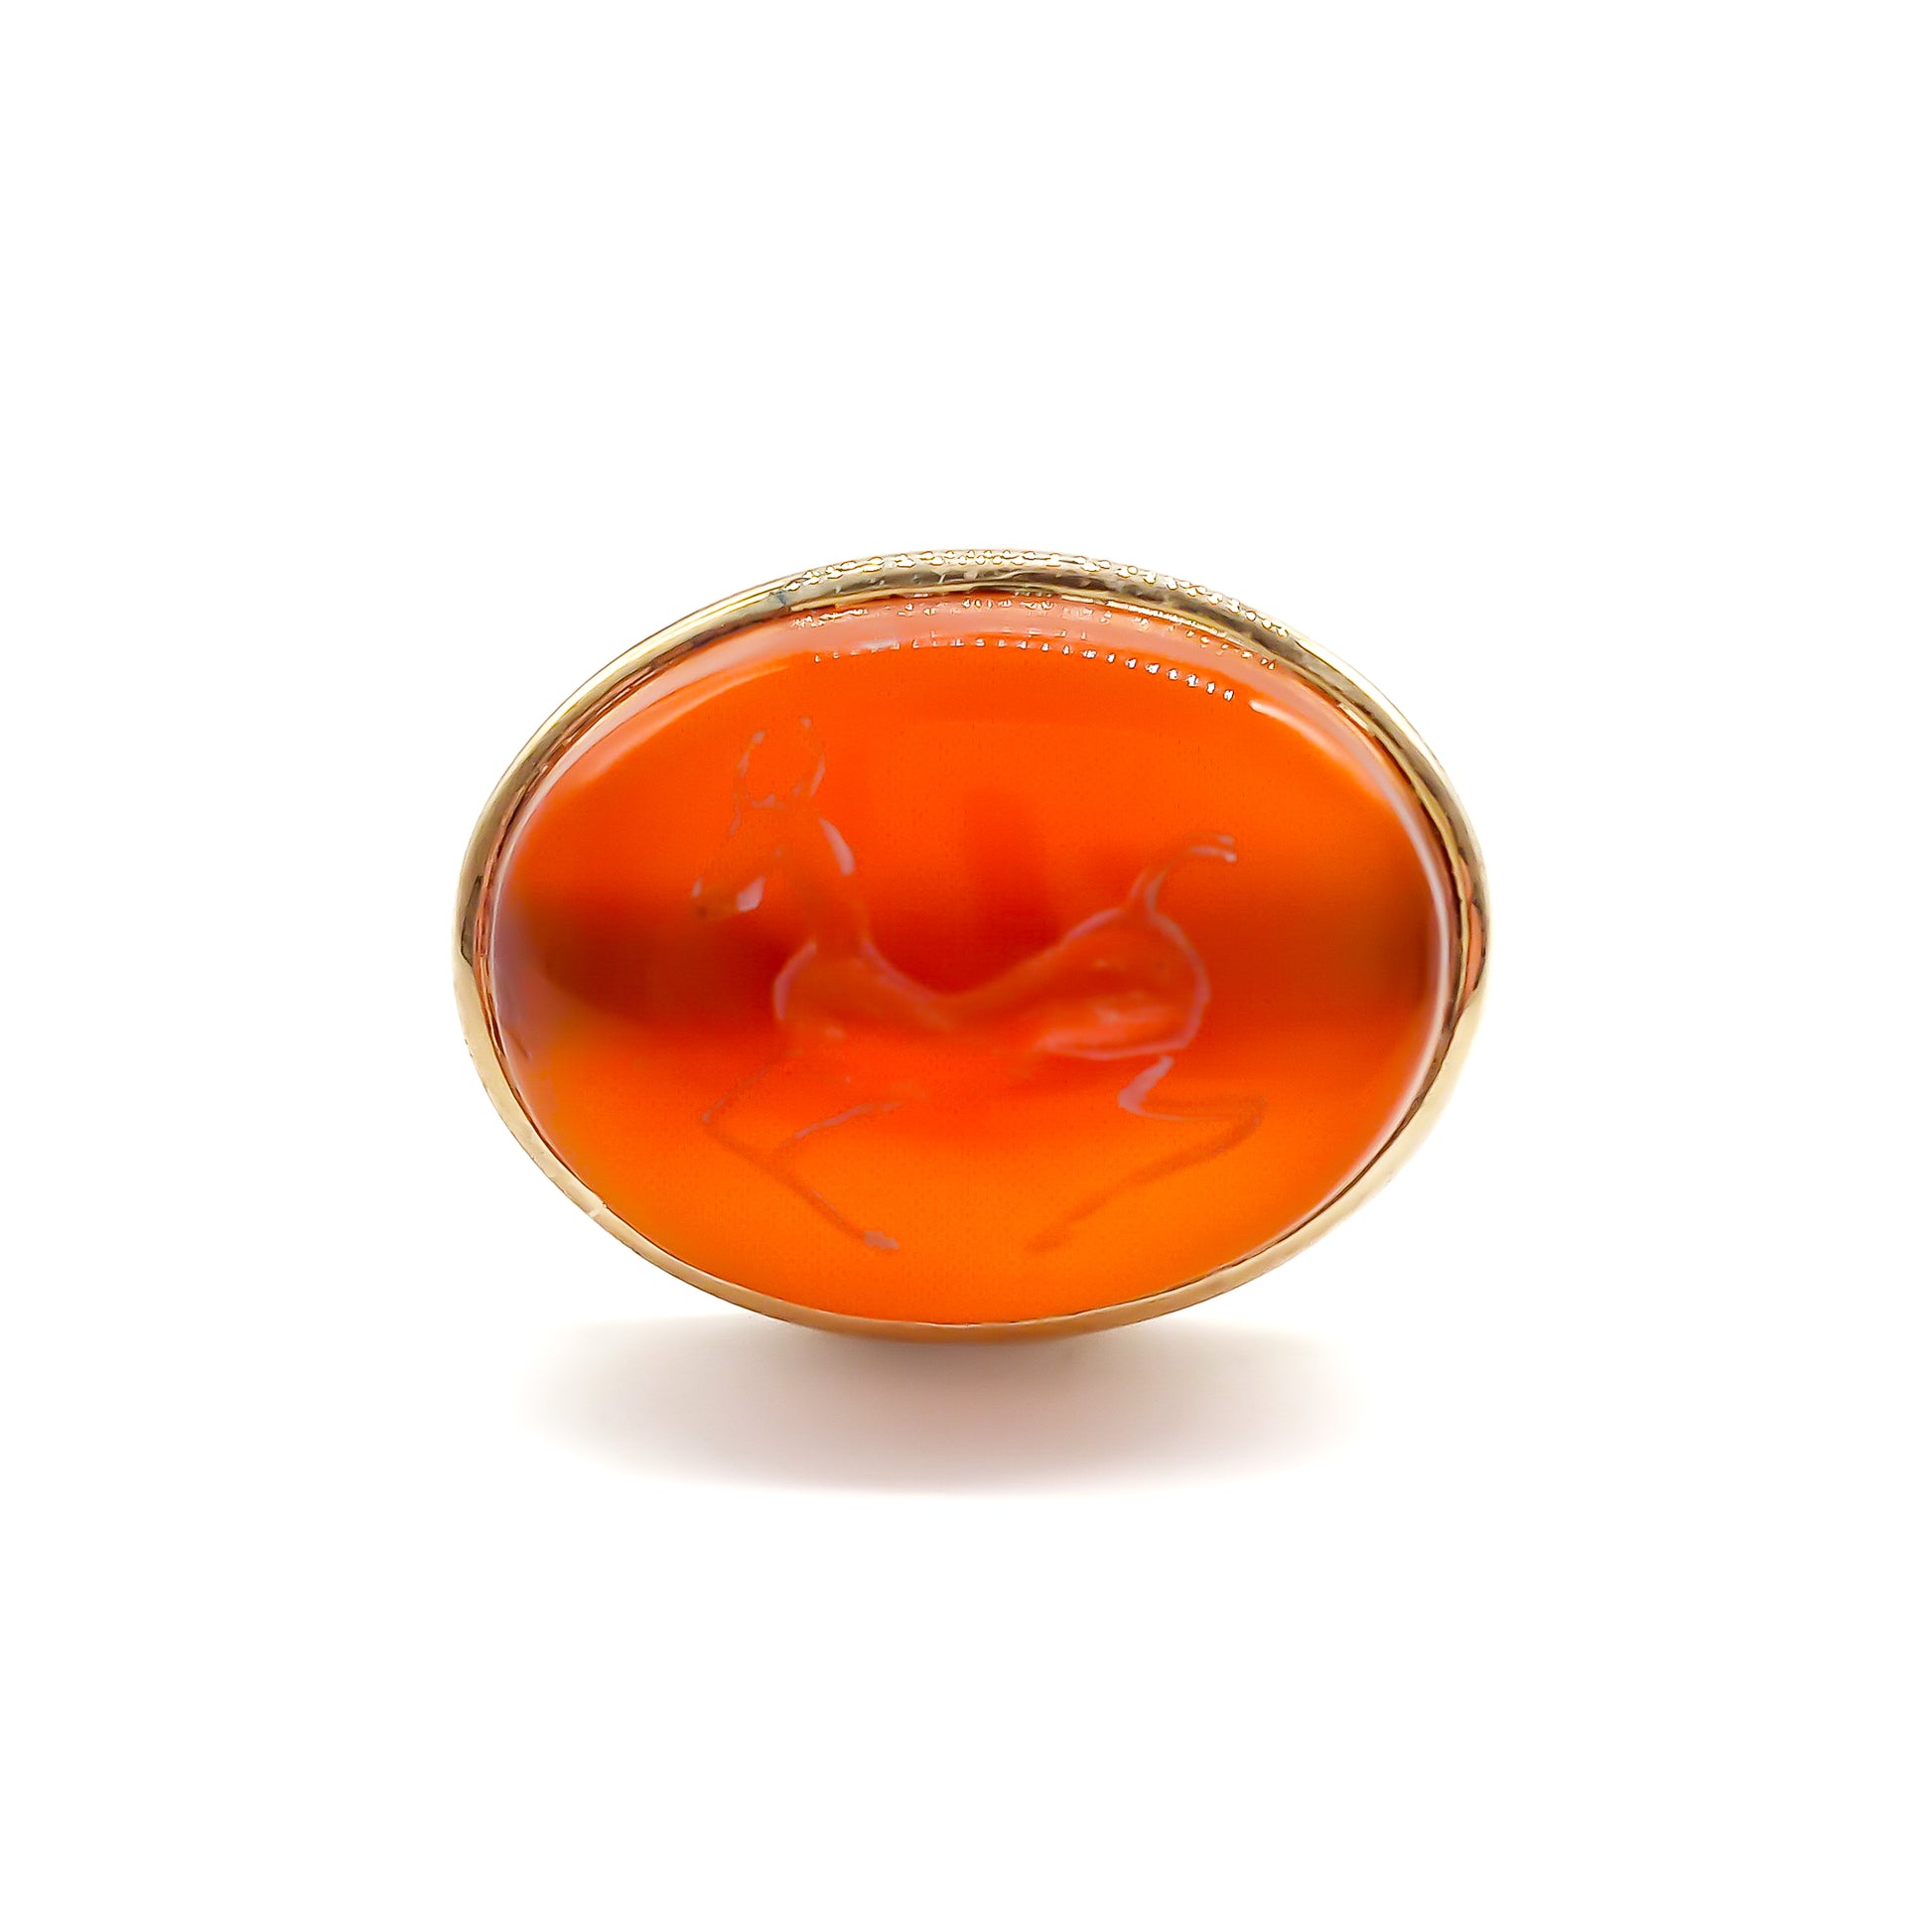 Unusual 9ct rose gold ring set with an antique oval carnelian intaglio depicting a stag.